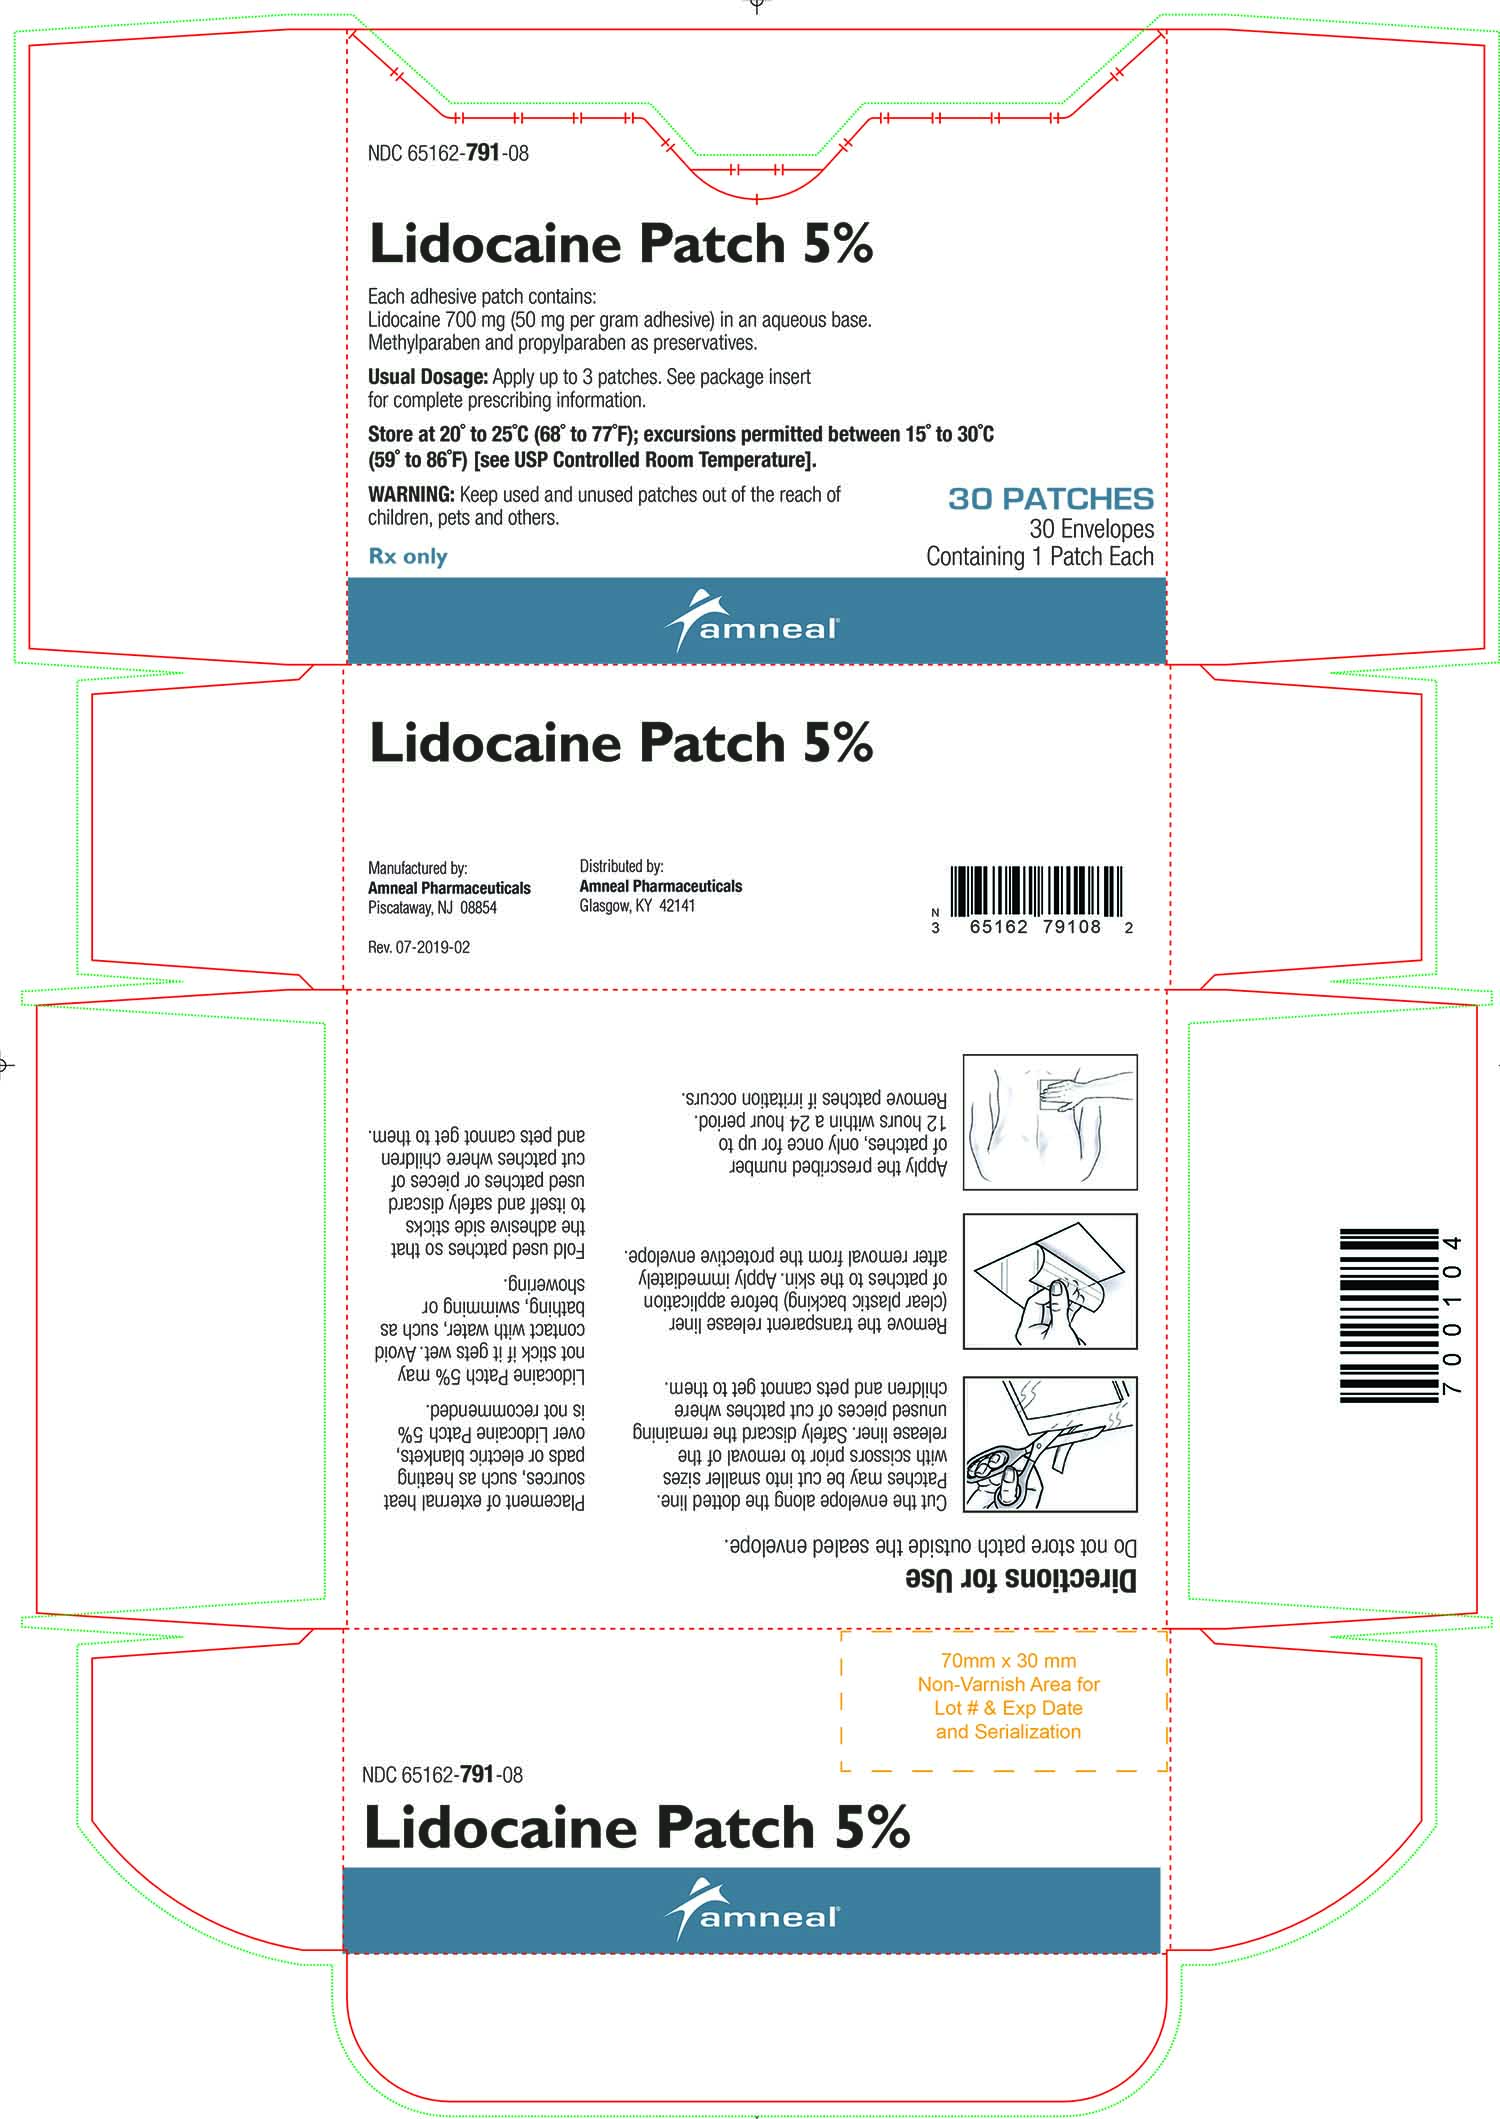 '.Lidocaine 5% Patches Amneal.'